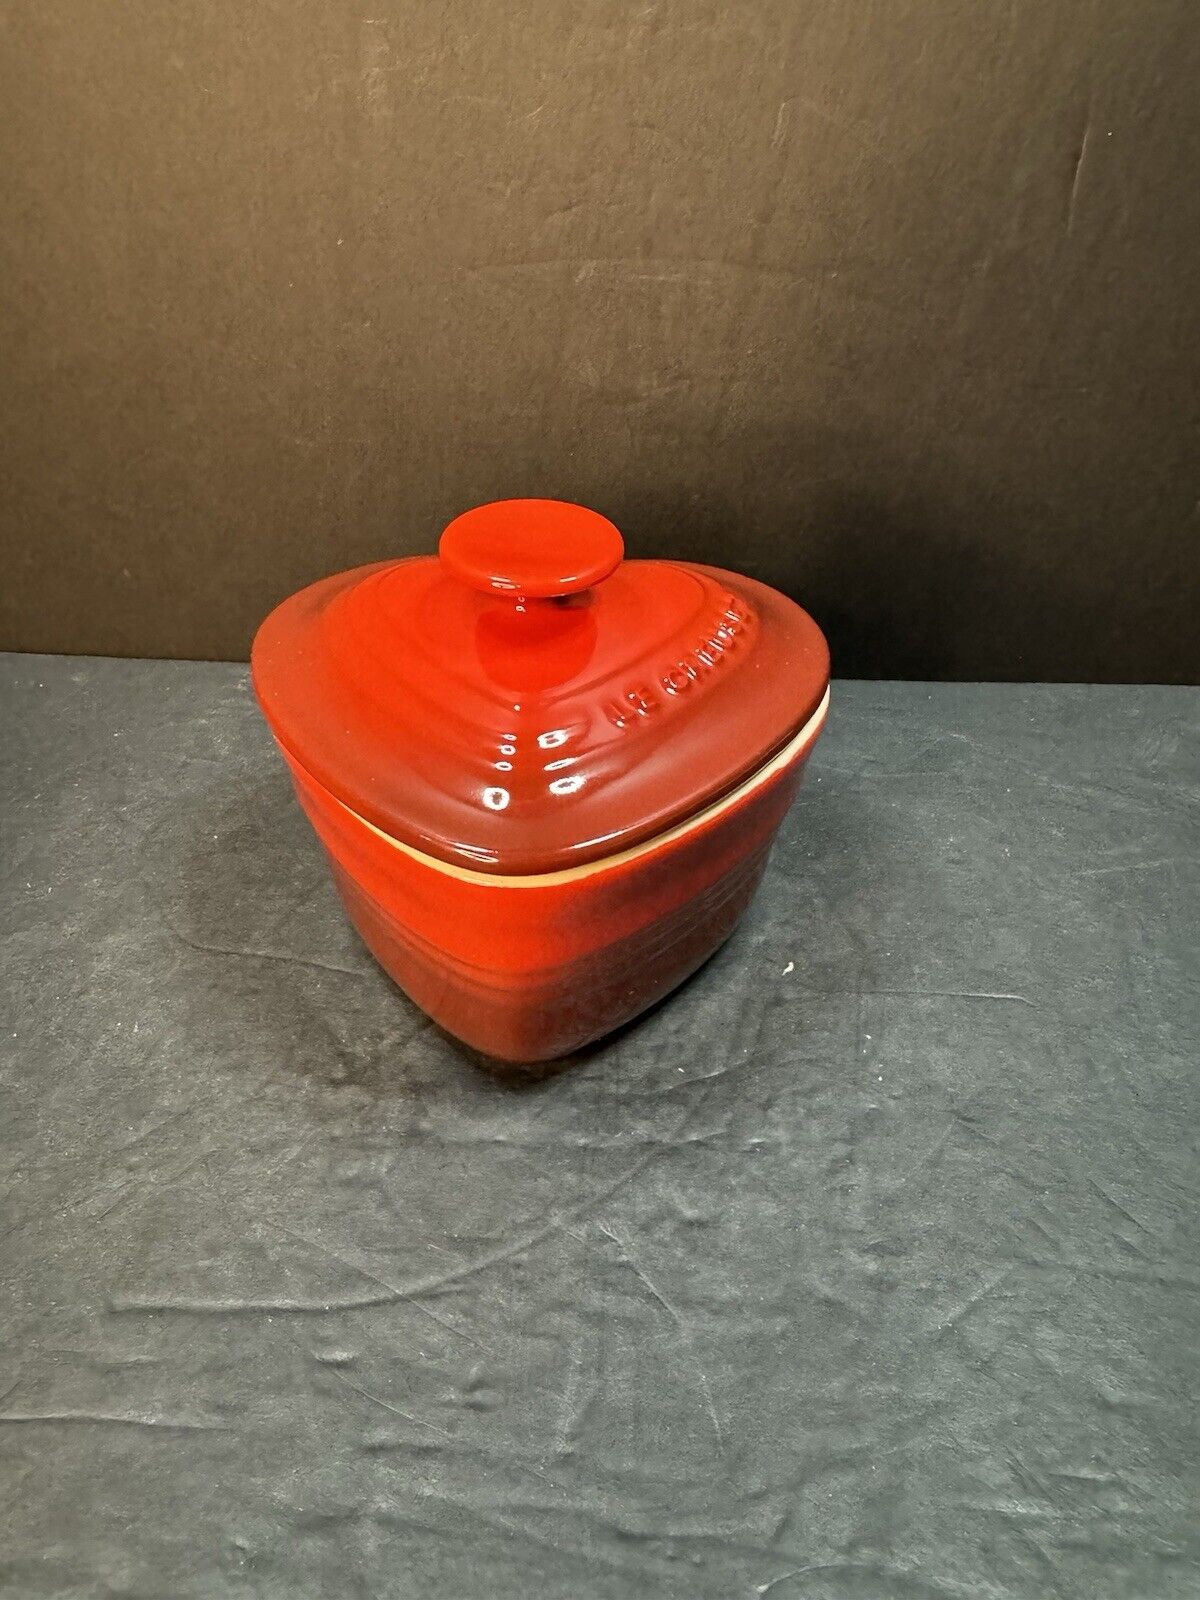 LE CREUSET Heart Shaped Ceramic Shallow Heart Mini Casserole Red with Lid